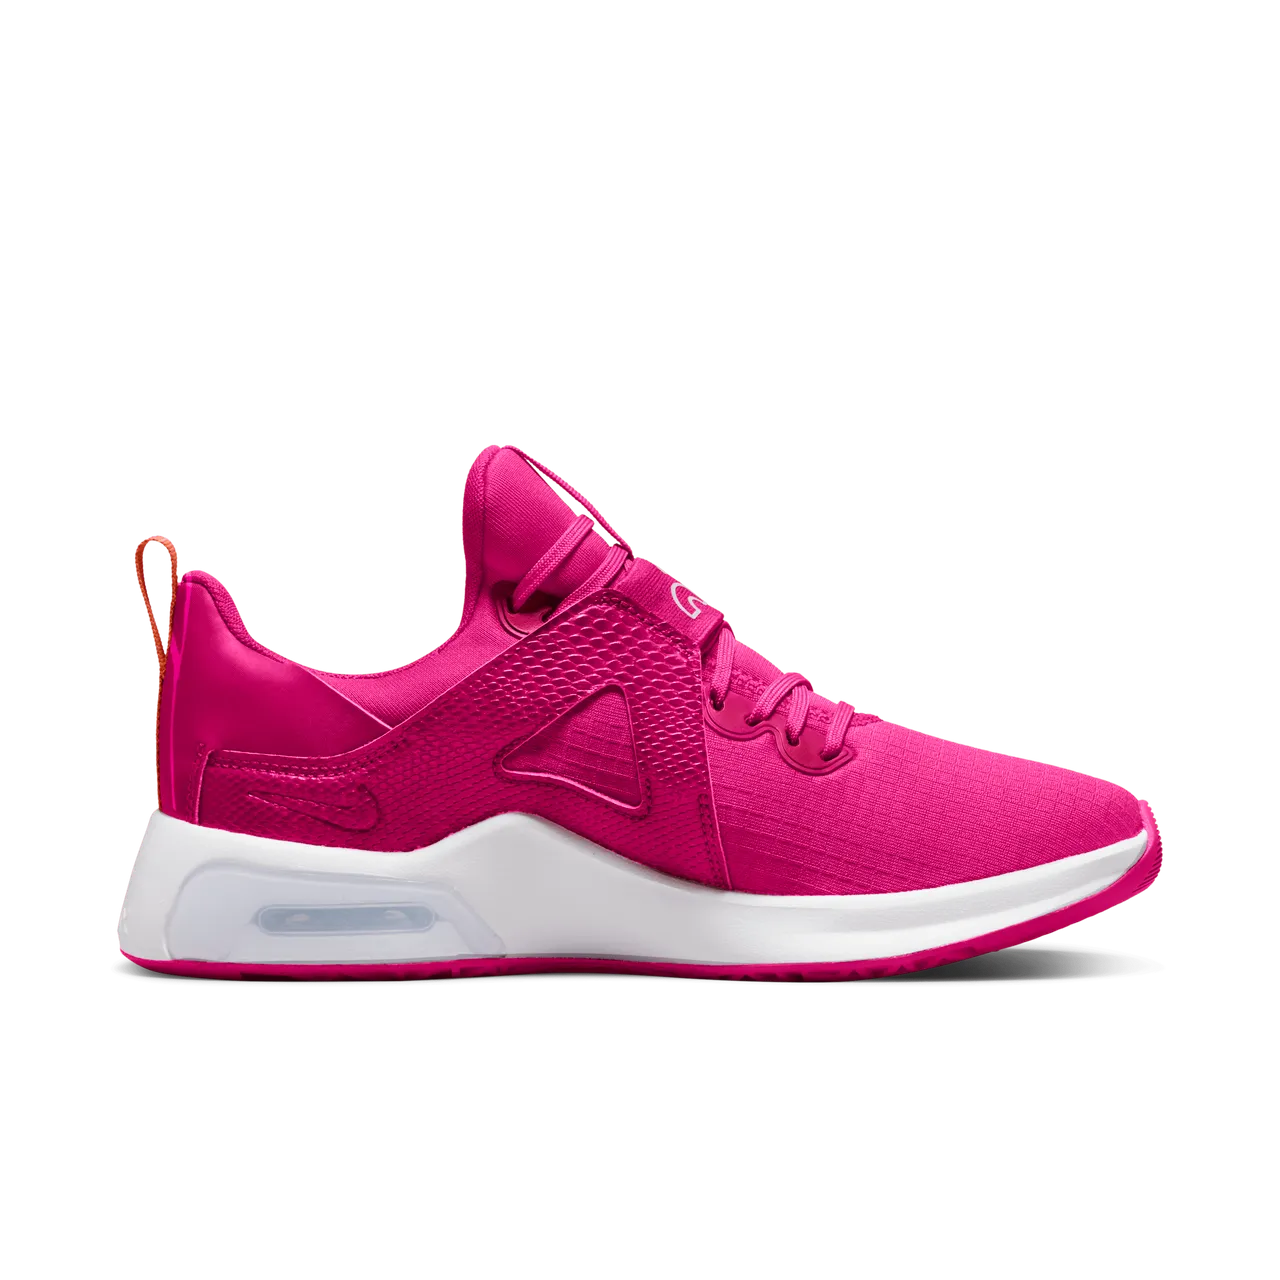 Nike Air Max Bella TR 5 Women's Workout Shoes - Pink